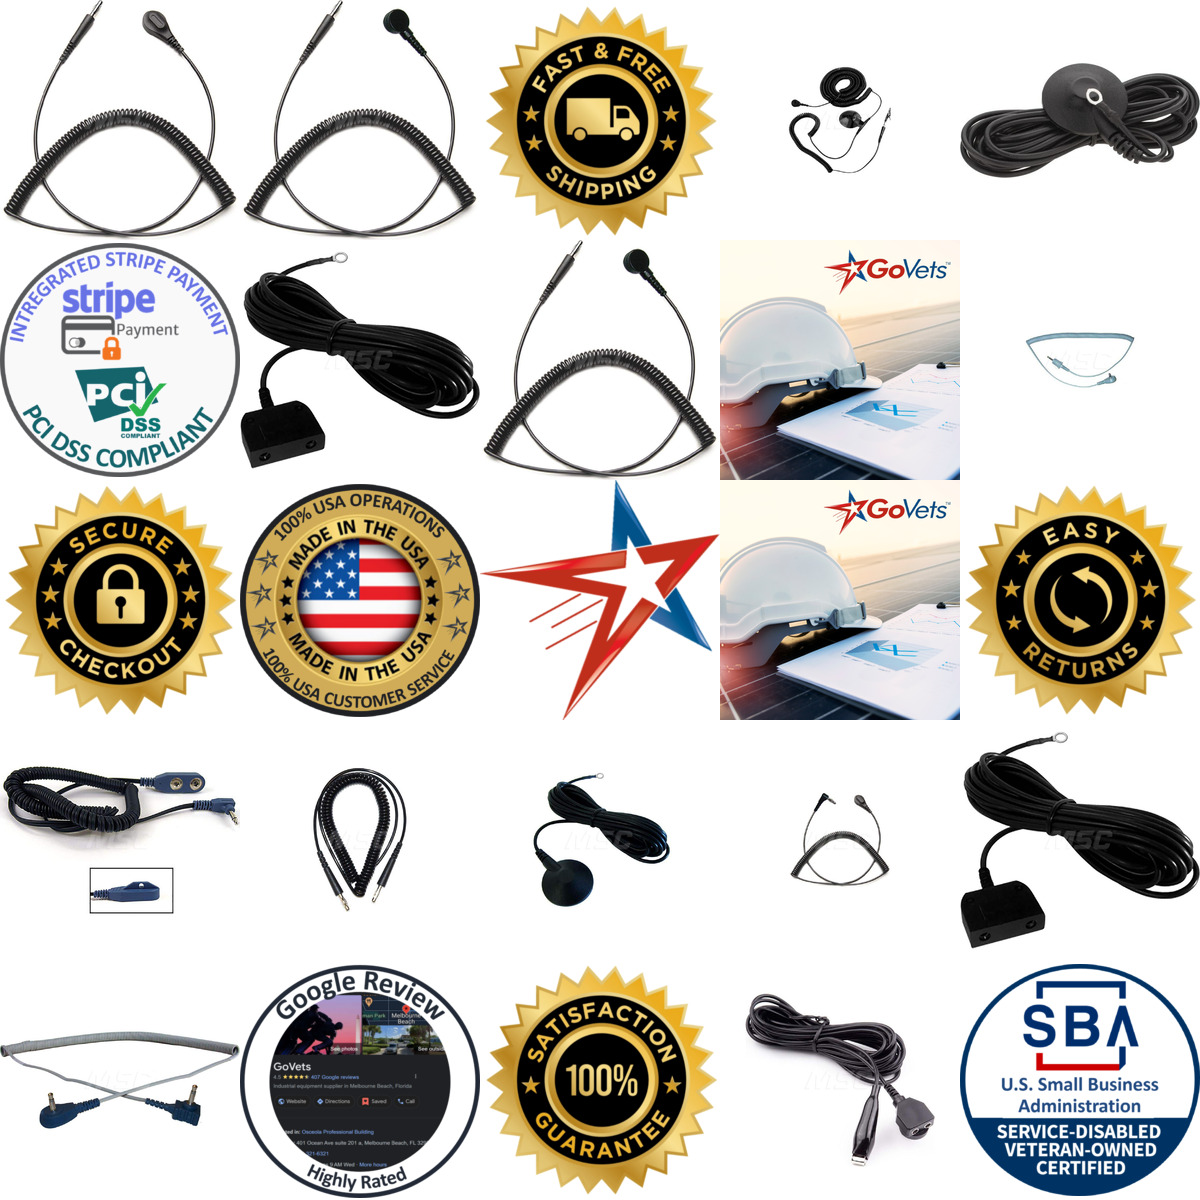 A selection of Grounding Cords products on GoVets